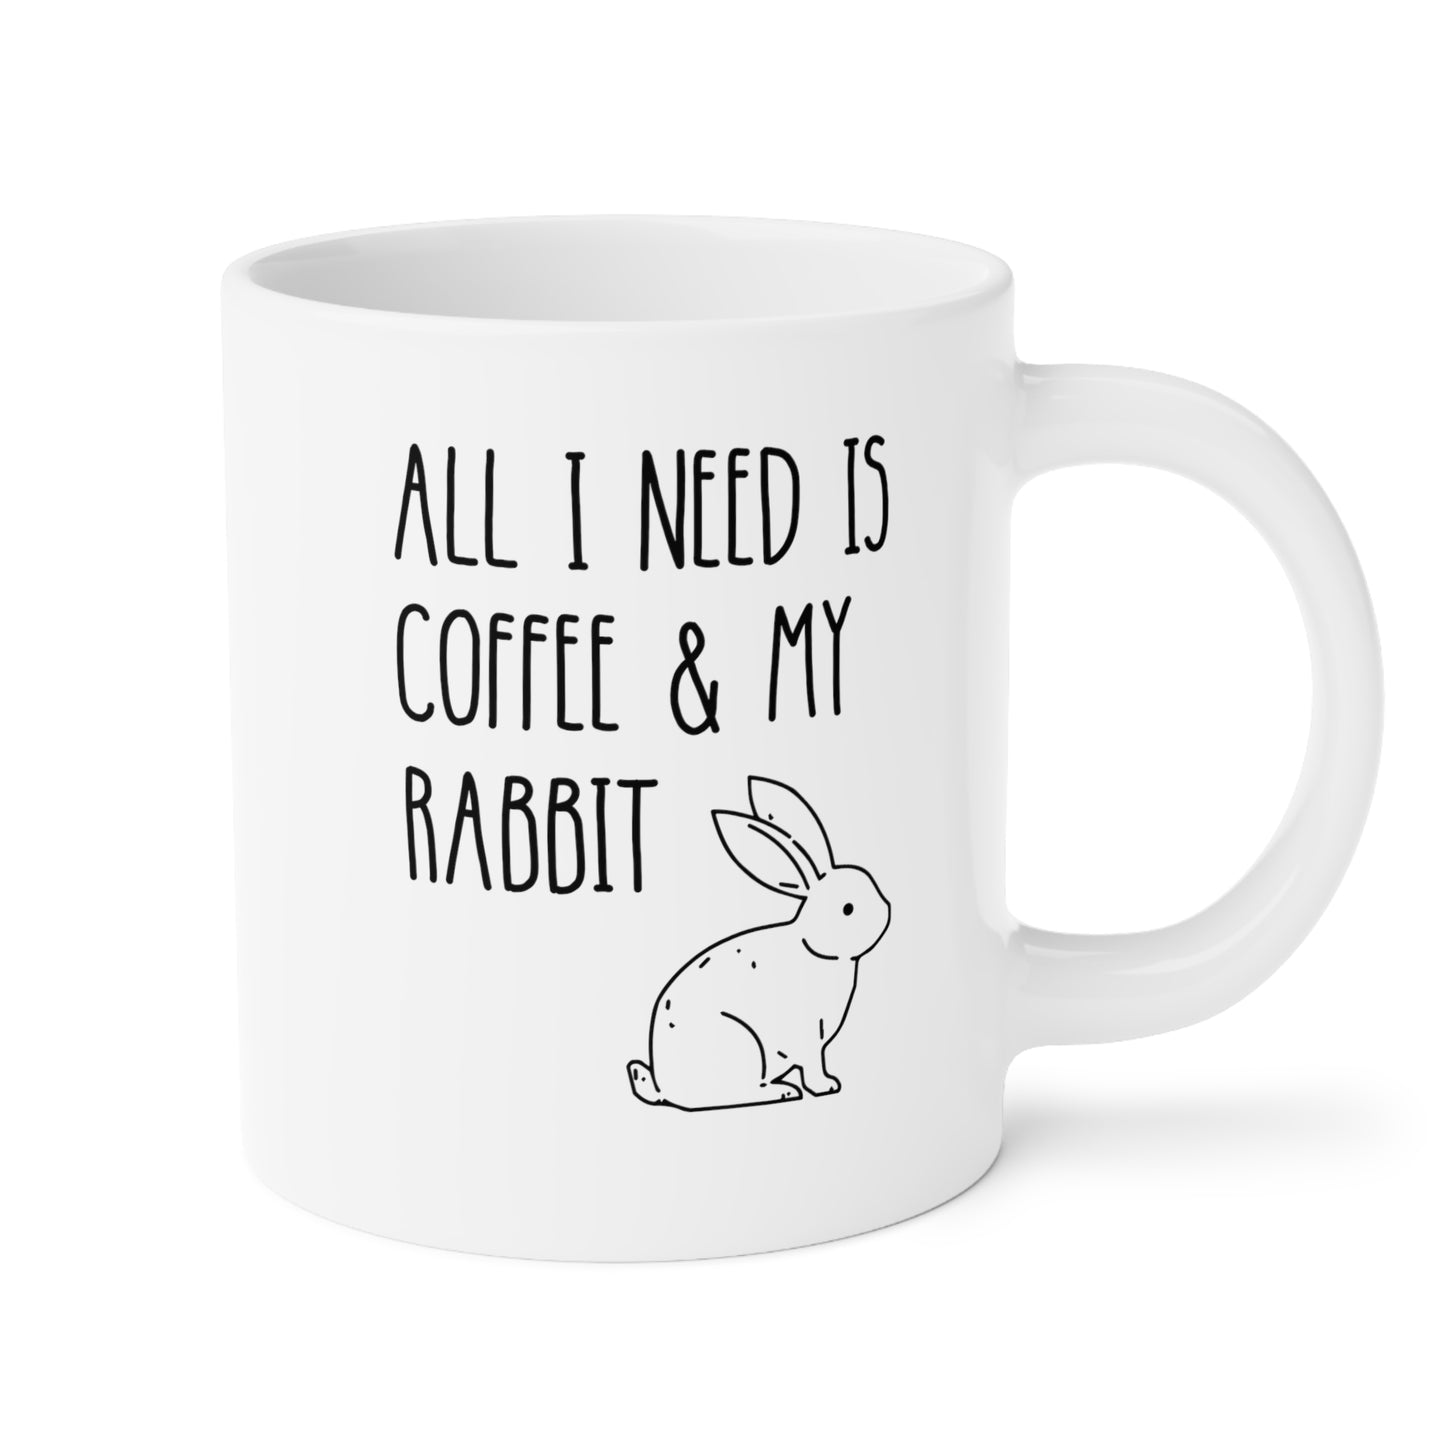 All I Need Is Coffee And My Rabbit 20oz white funny large coffee mug gift for her mom dad birthday bunny lover pet owner furparent waveywares wavey wares wavywares wavy wares